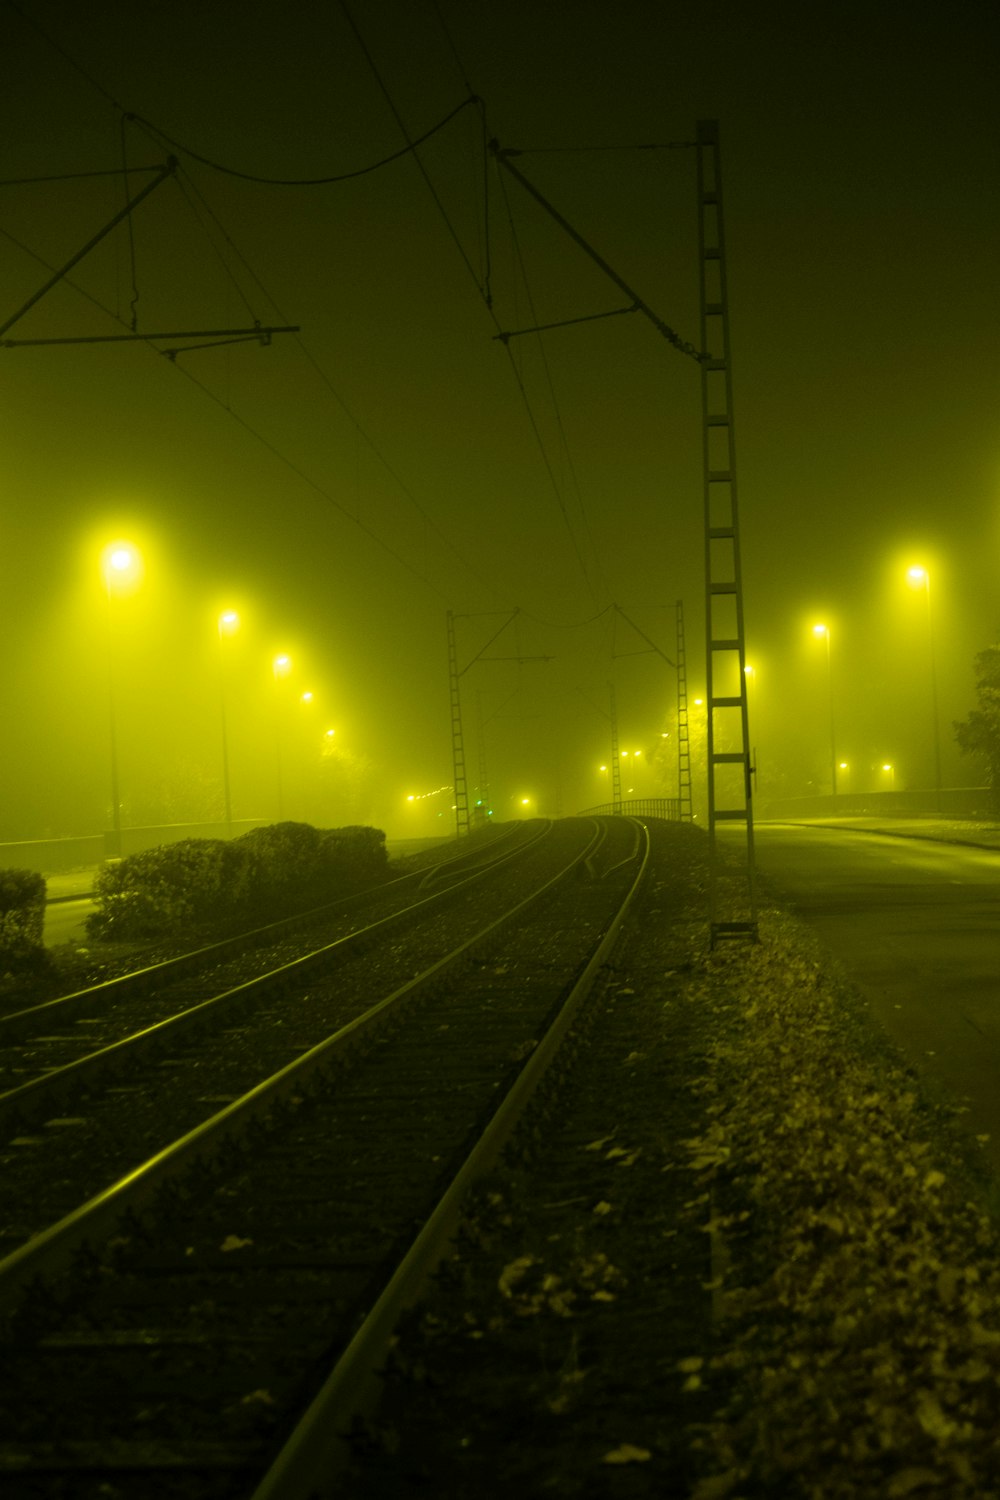 a foggy train track at night with street lights